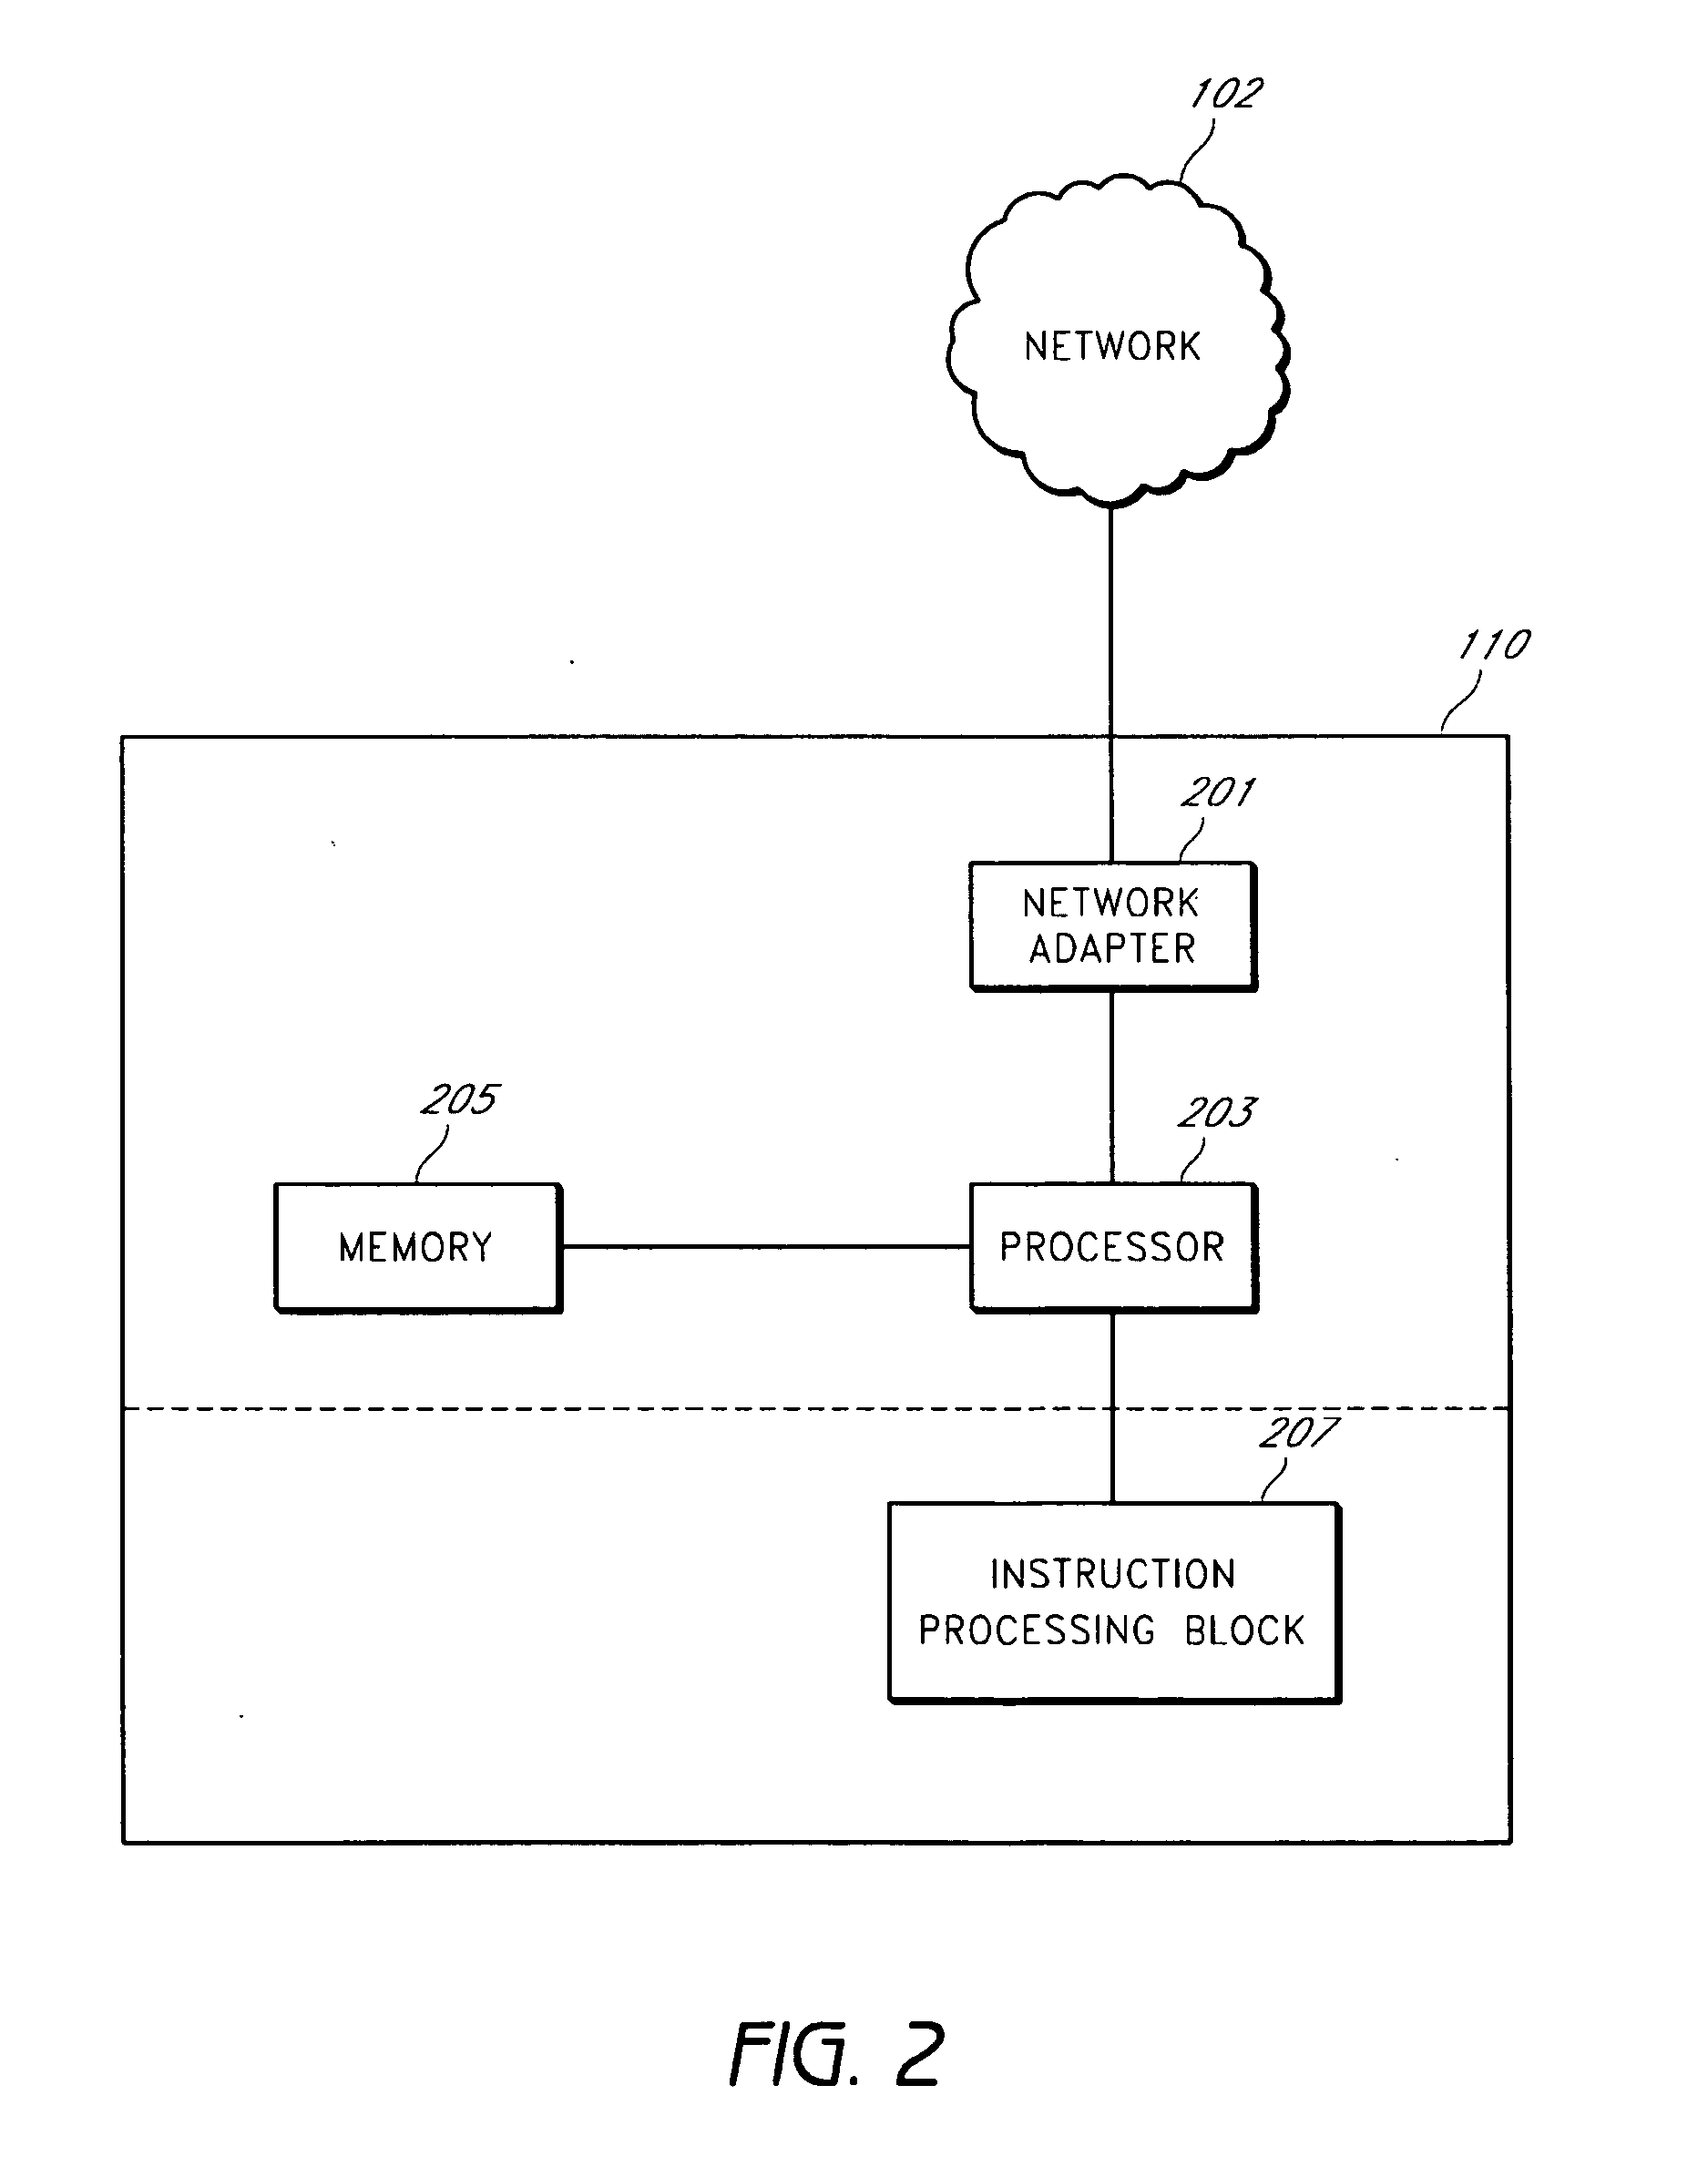 System and method for the remote operation and management of networked multi-function peripheral (MFP) devices via web feeds